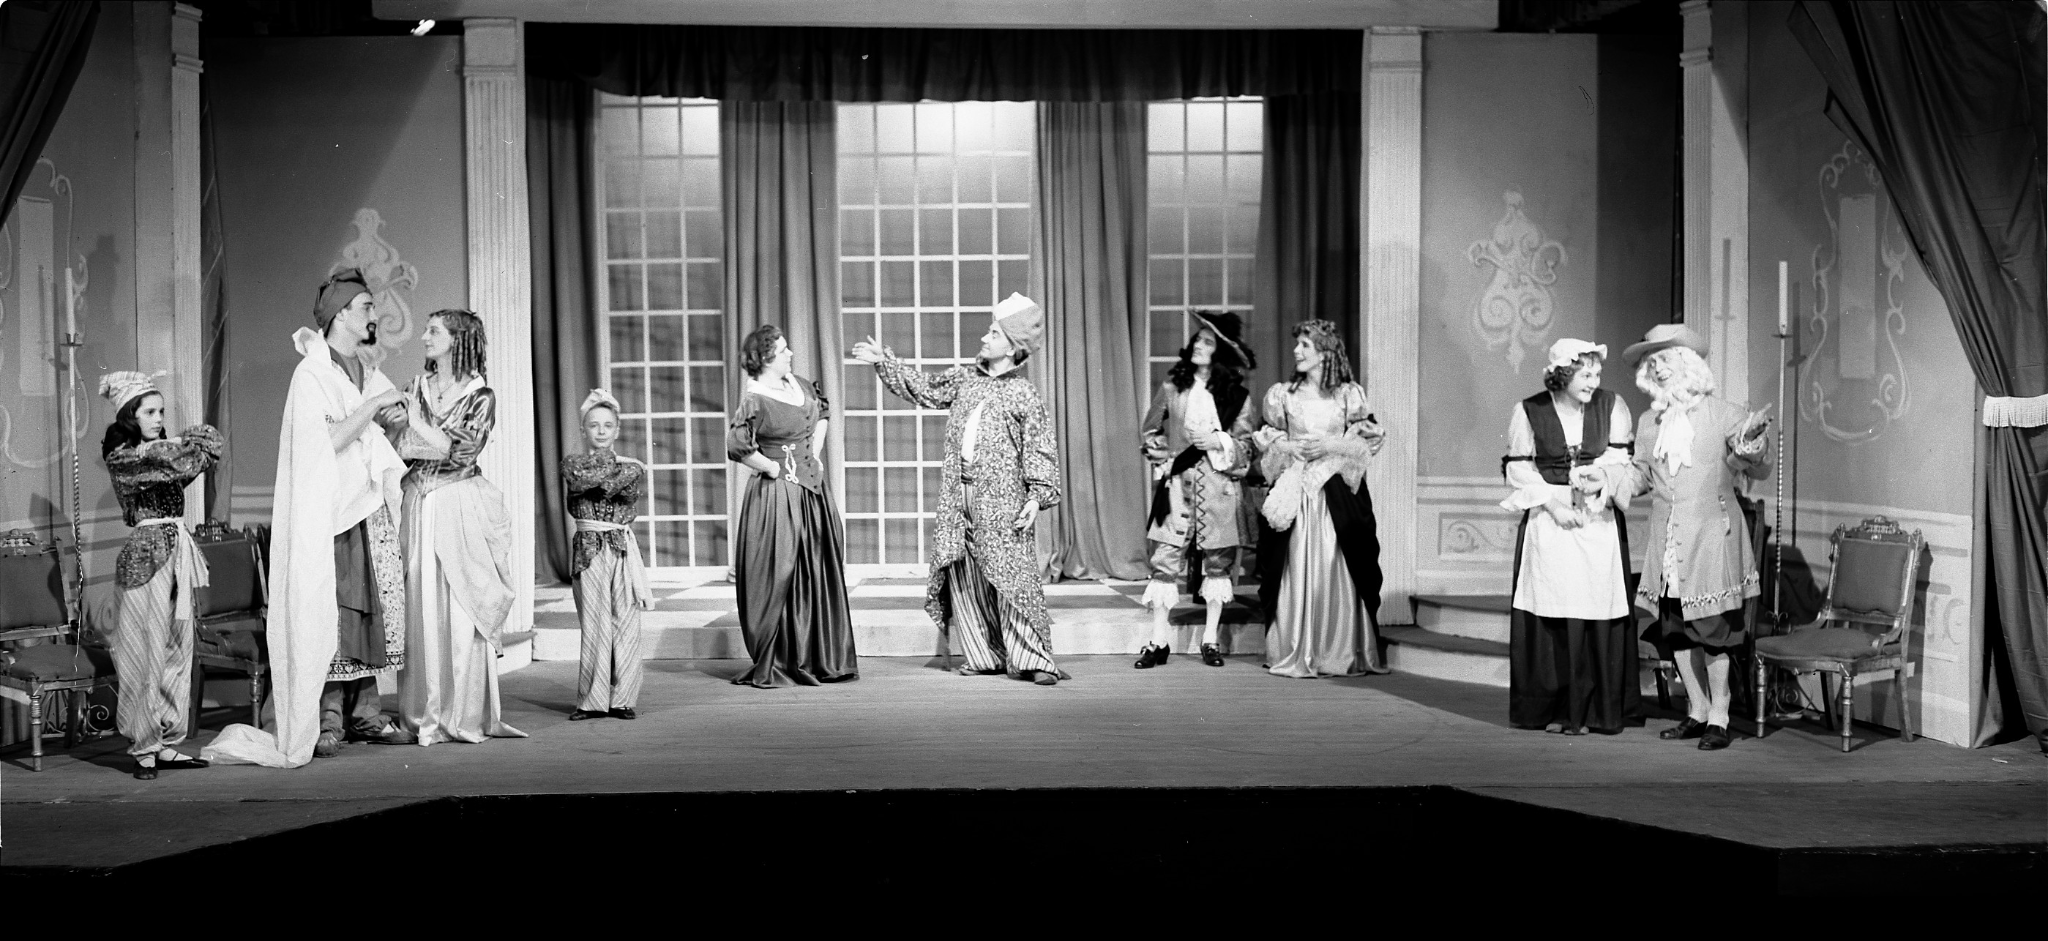 A cast of ten Caucasian actors stand on a stage designed to look like a grand ballroom. They wear seventeenth century clothing and stand in small conversation groups.